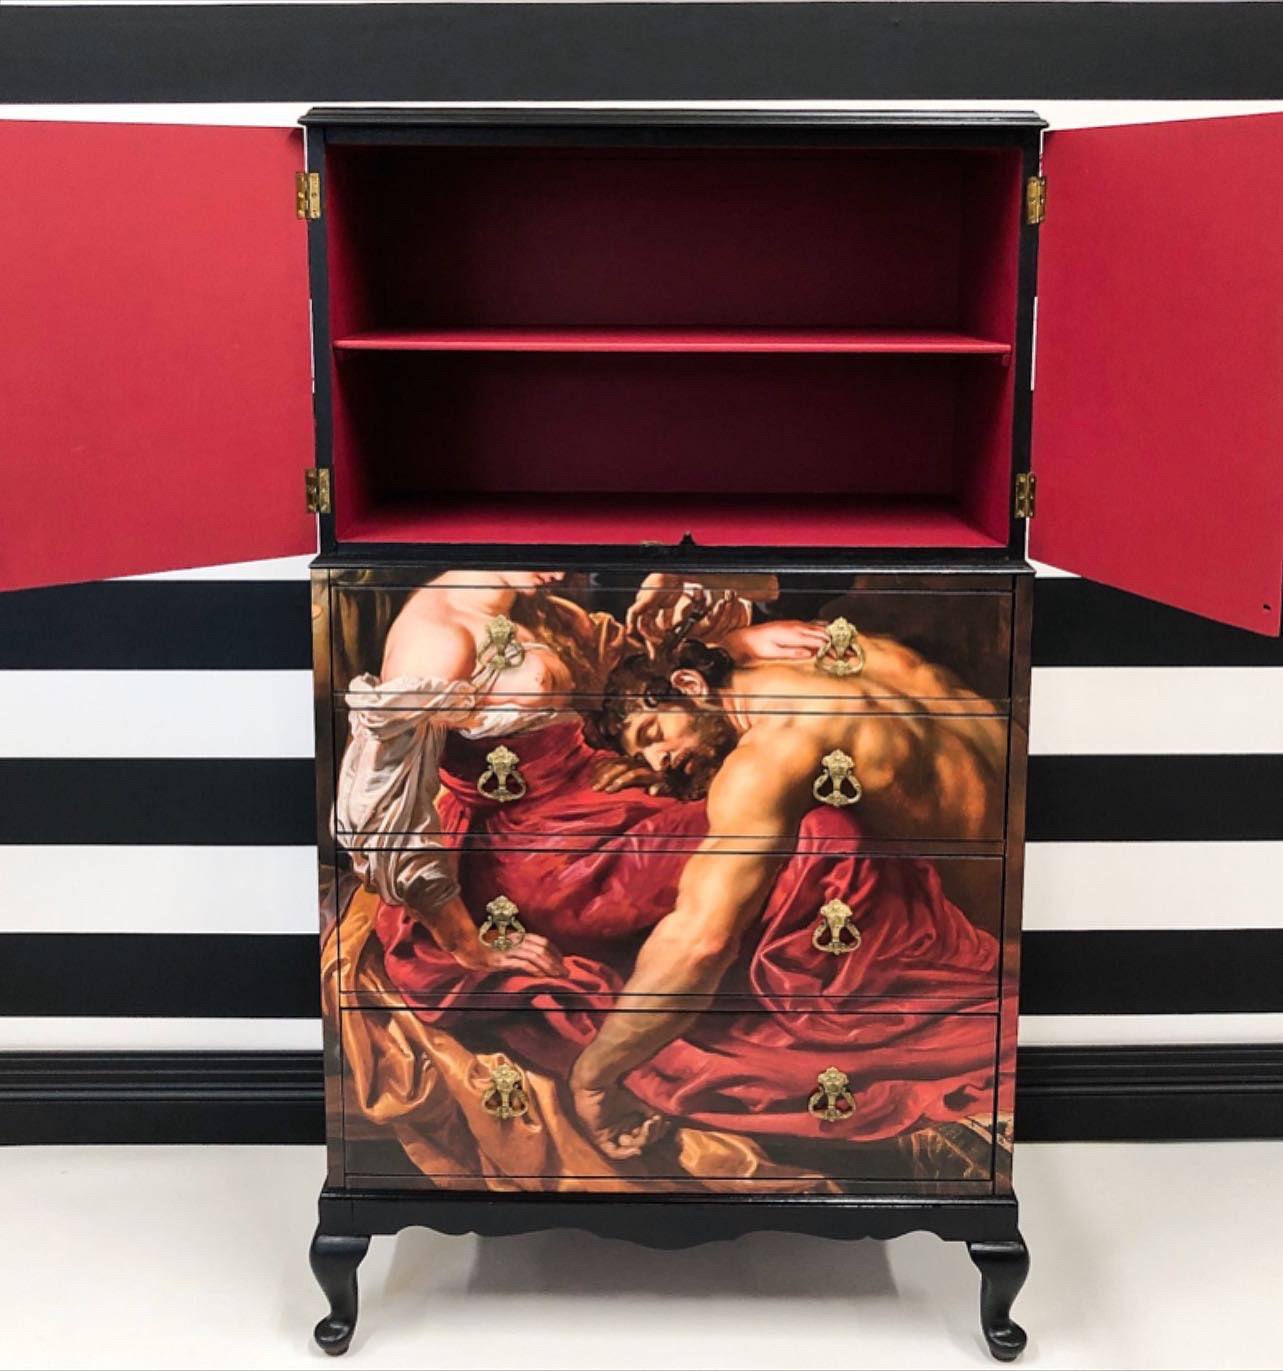 Upcycled cocktail cabinet with a classic art design on the front